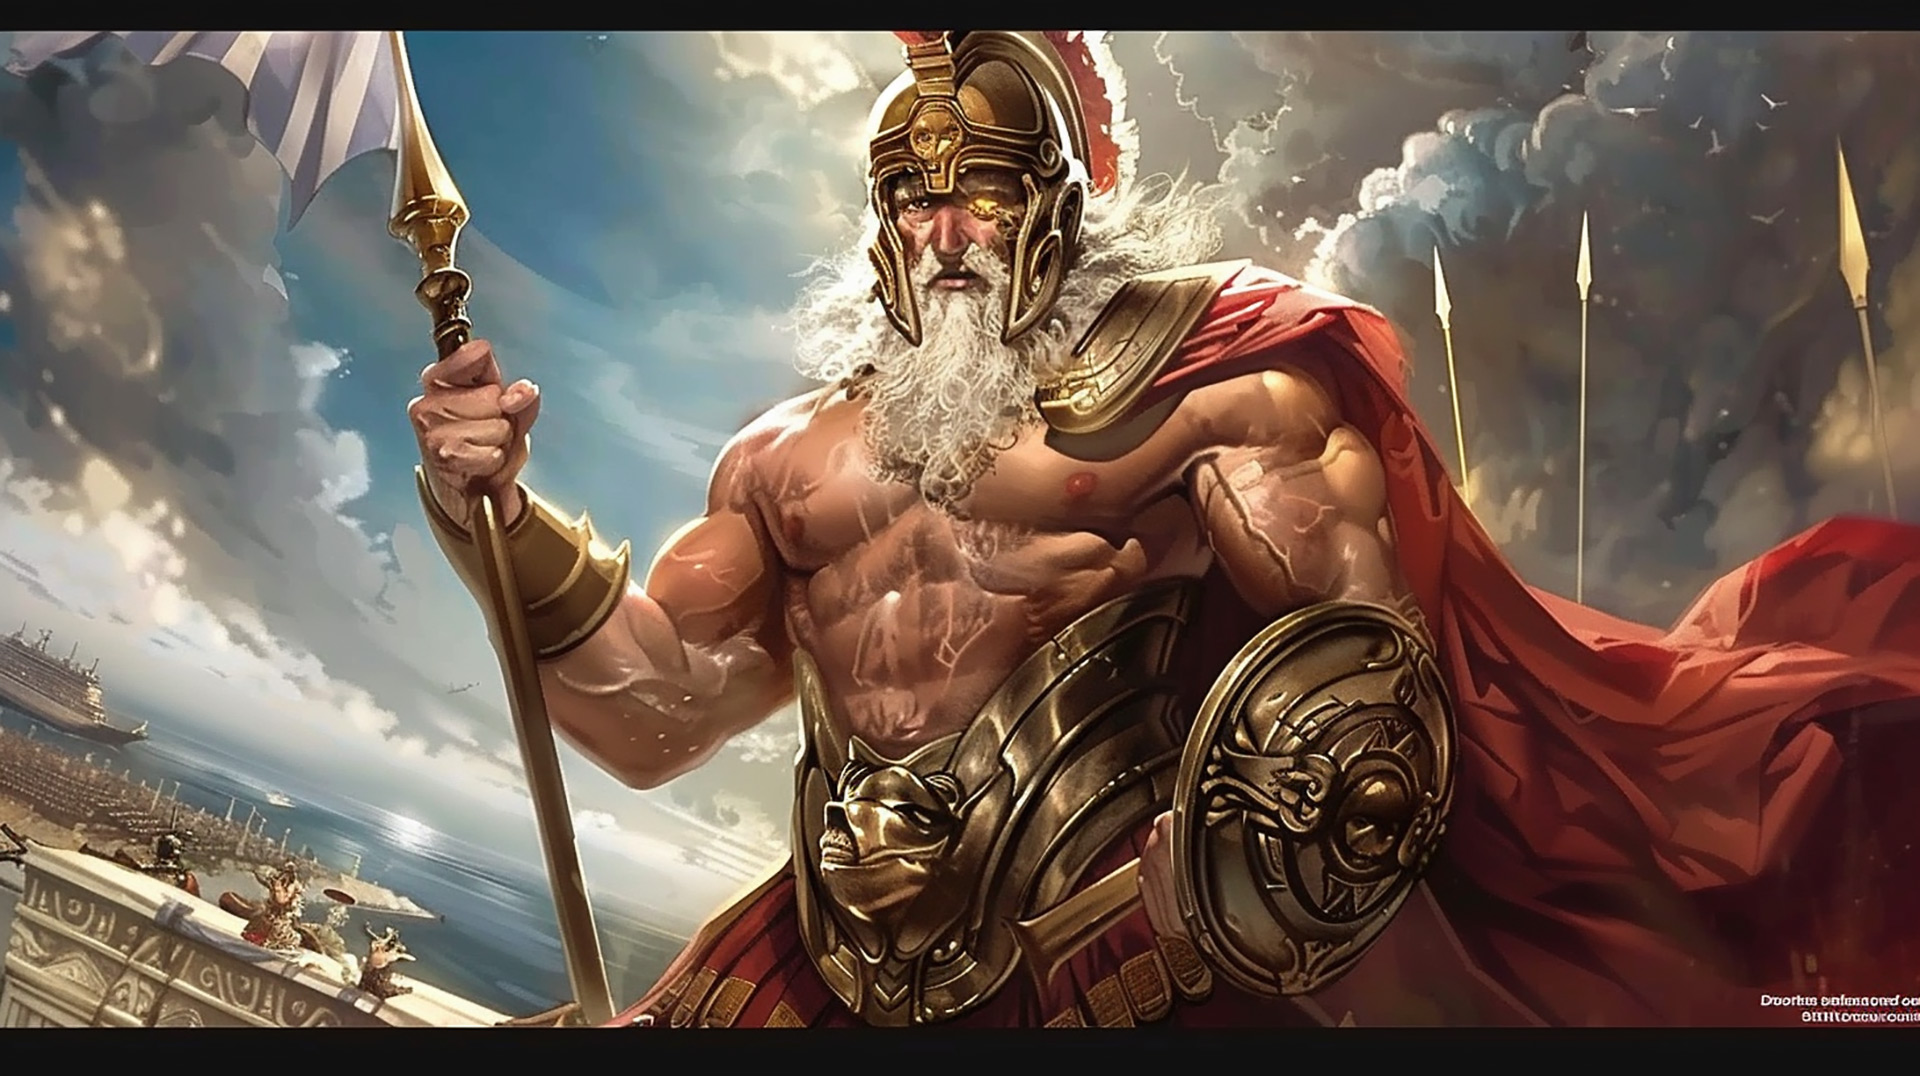 Zeus's Dominion: AI Wallpaper Capturing the King of the Olympians